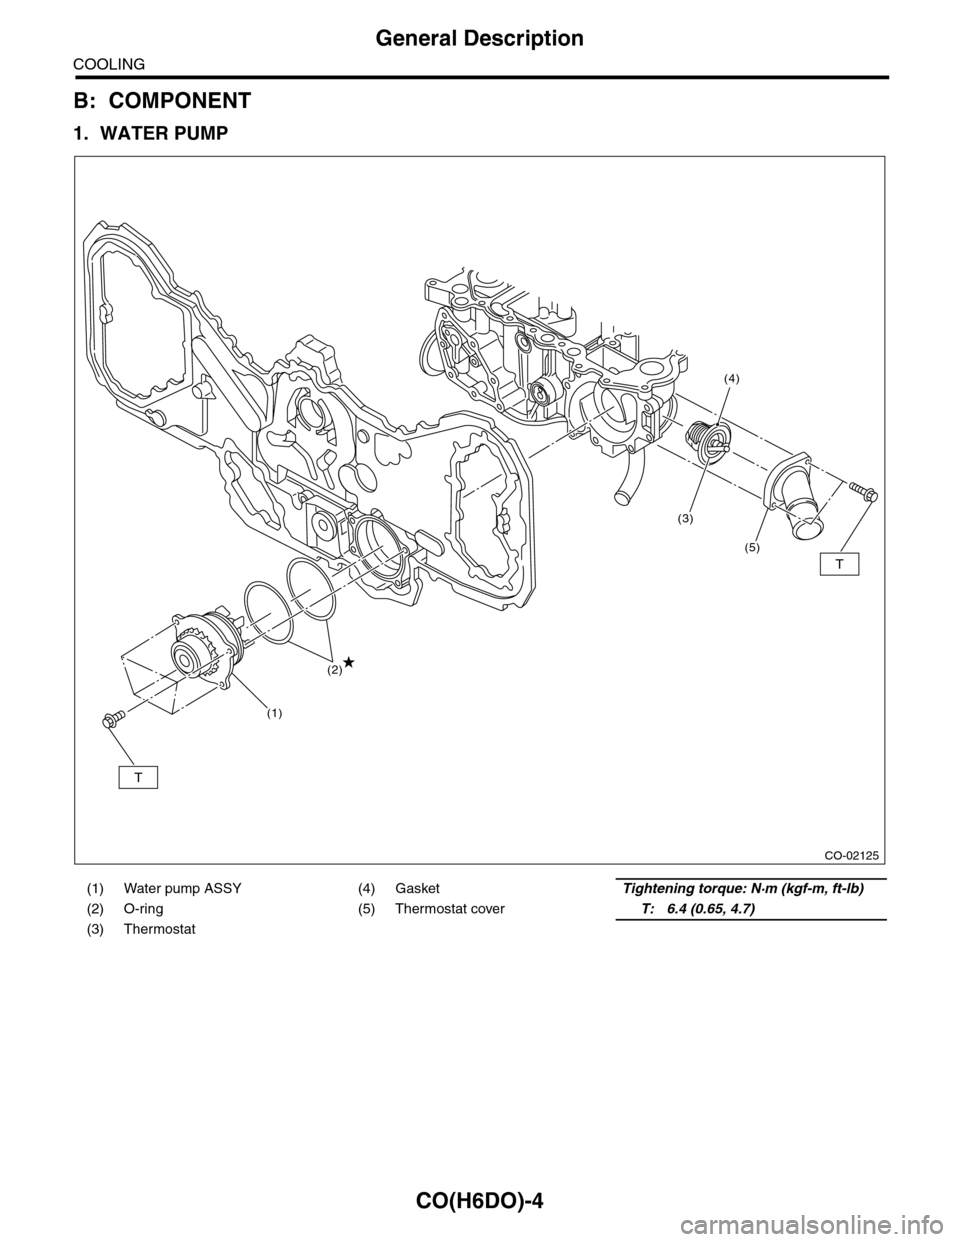 SUBARU TRIBECA 2009 1.G Service Workshop Manual CO(H6DO)-4
General Description
COOLING
B: COMPONENT
1. WATER PUMP
(1) Water pump ASSY (4) GasketTightening torque: N·m (kgf-m, ft-lb)
(2) O-ring (5) Thermostat coverT: 6.4 (0.65, 4.7)
(3) Thermostat 